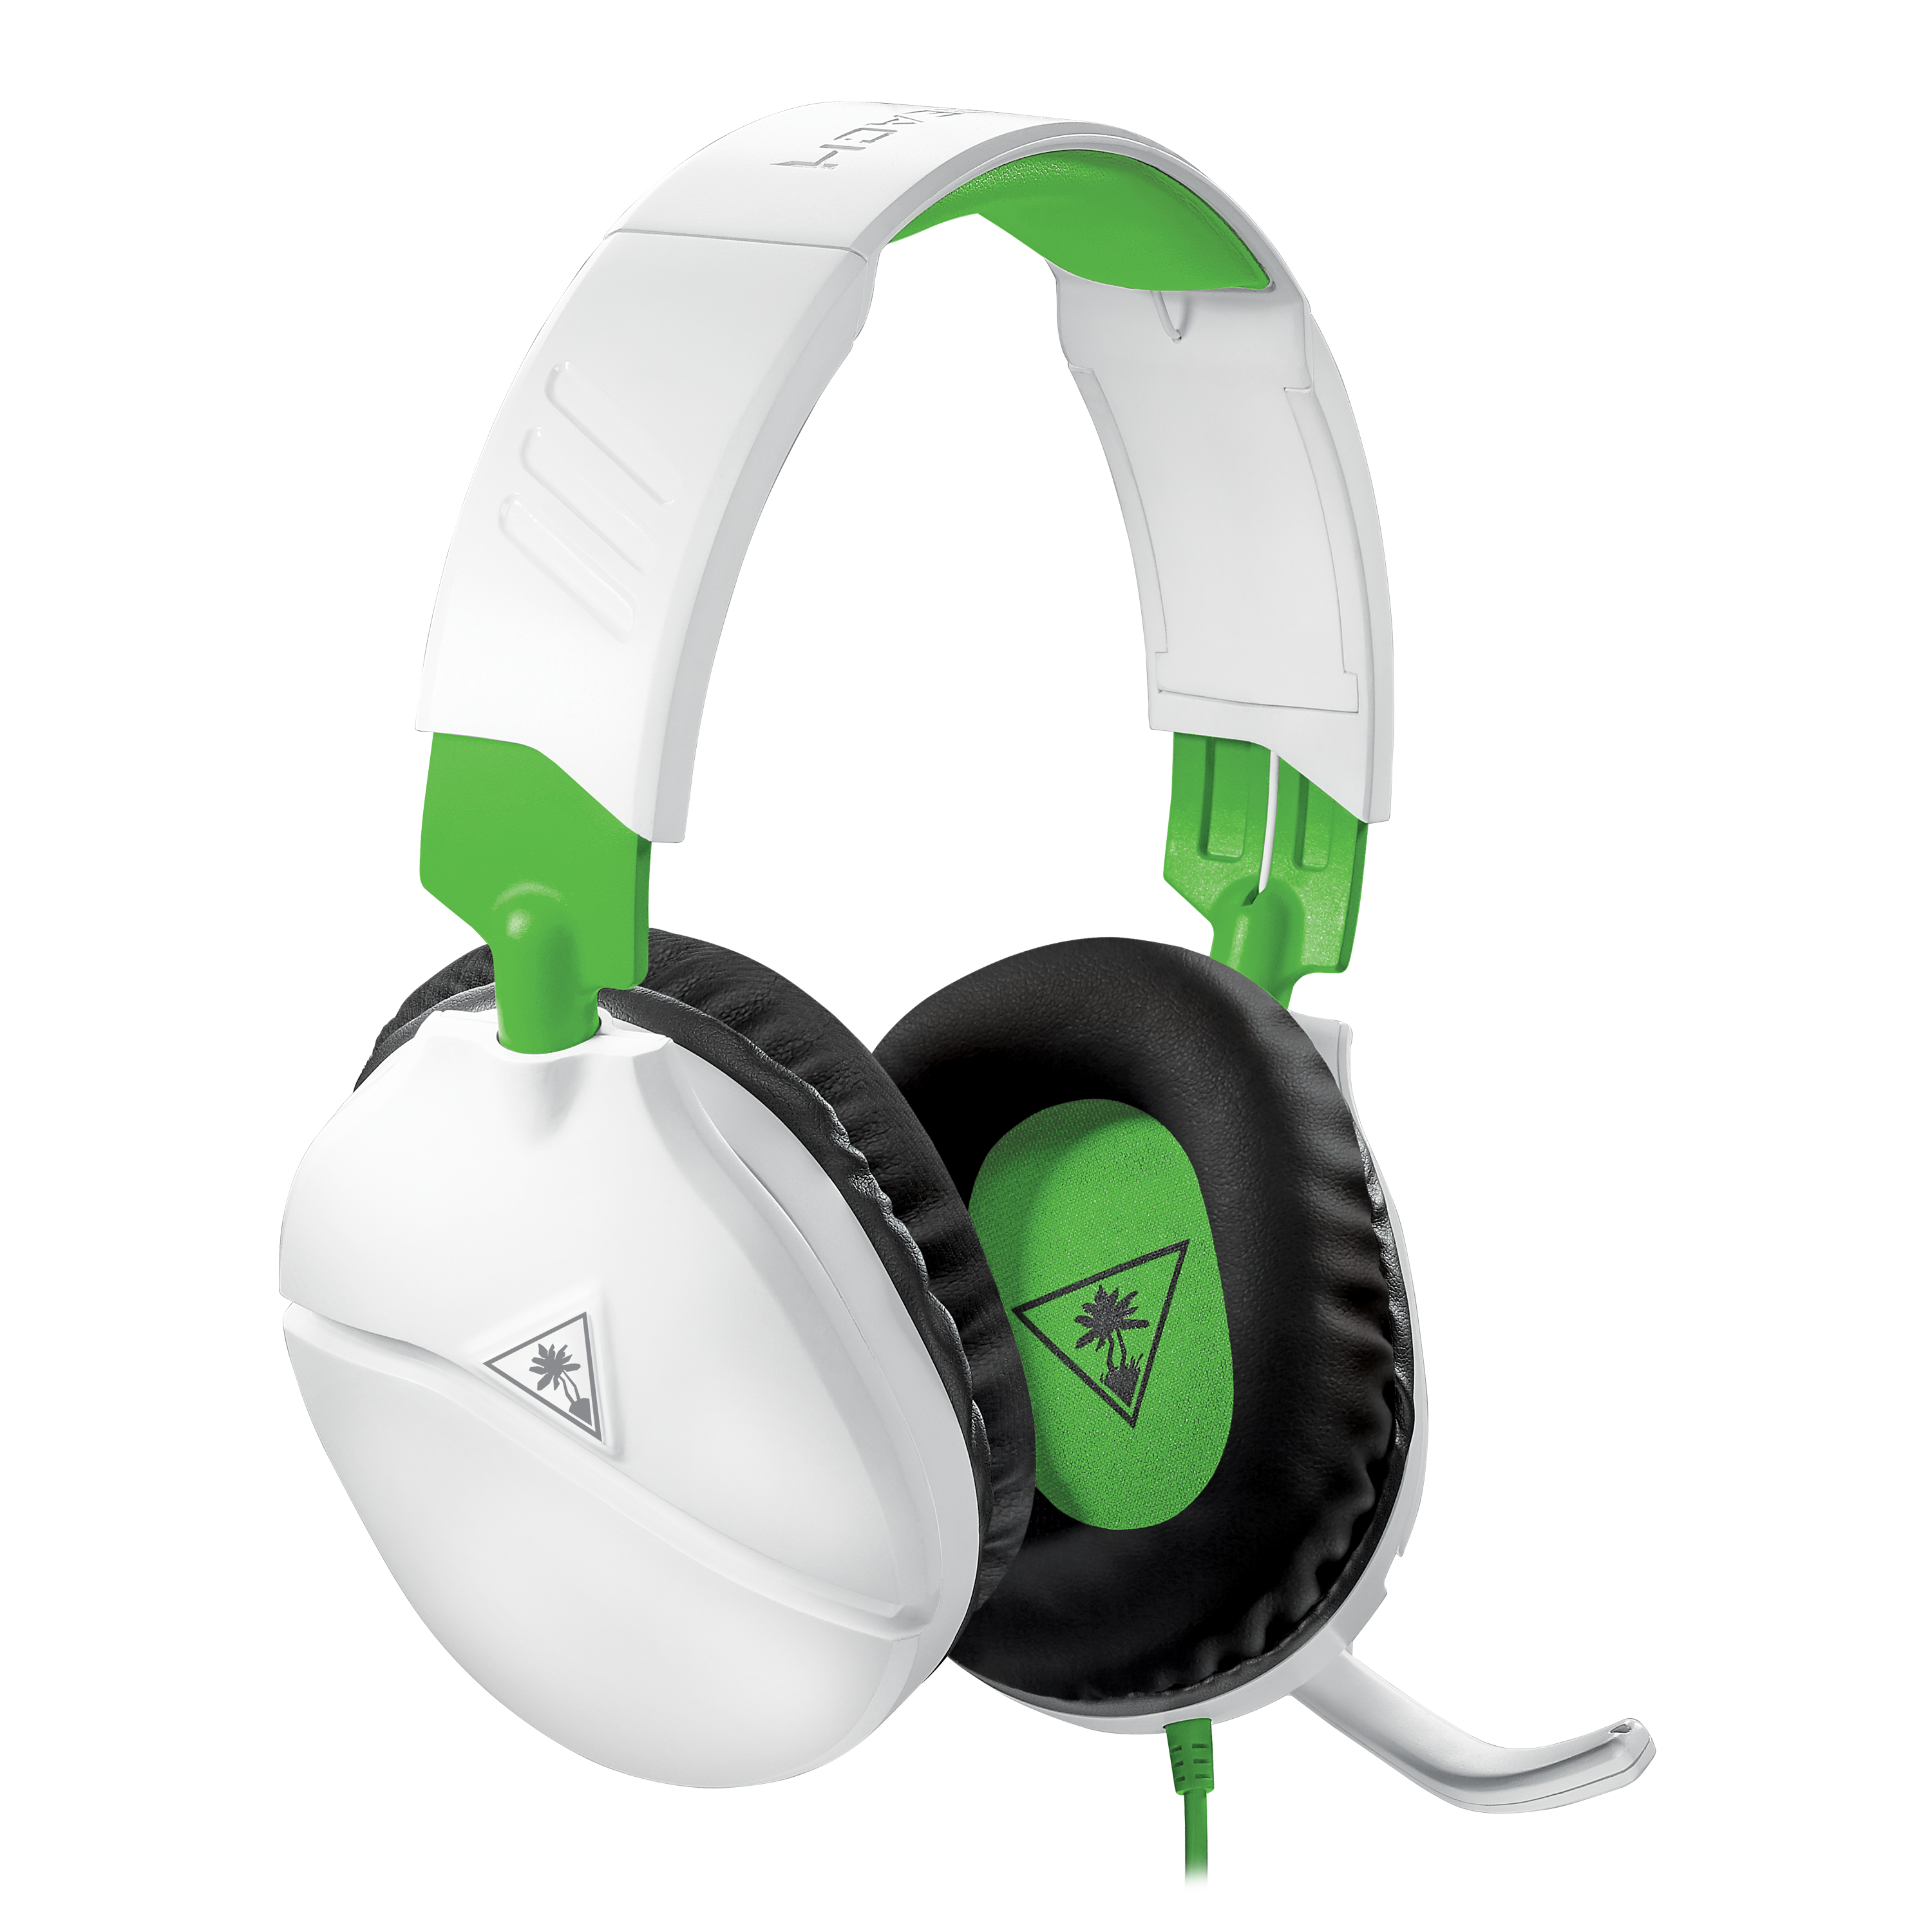 xbox ear force recon 70